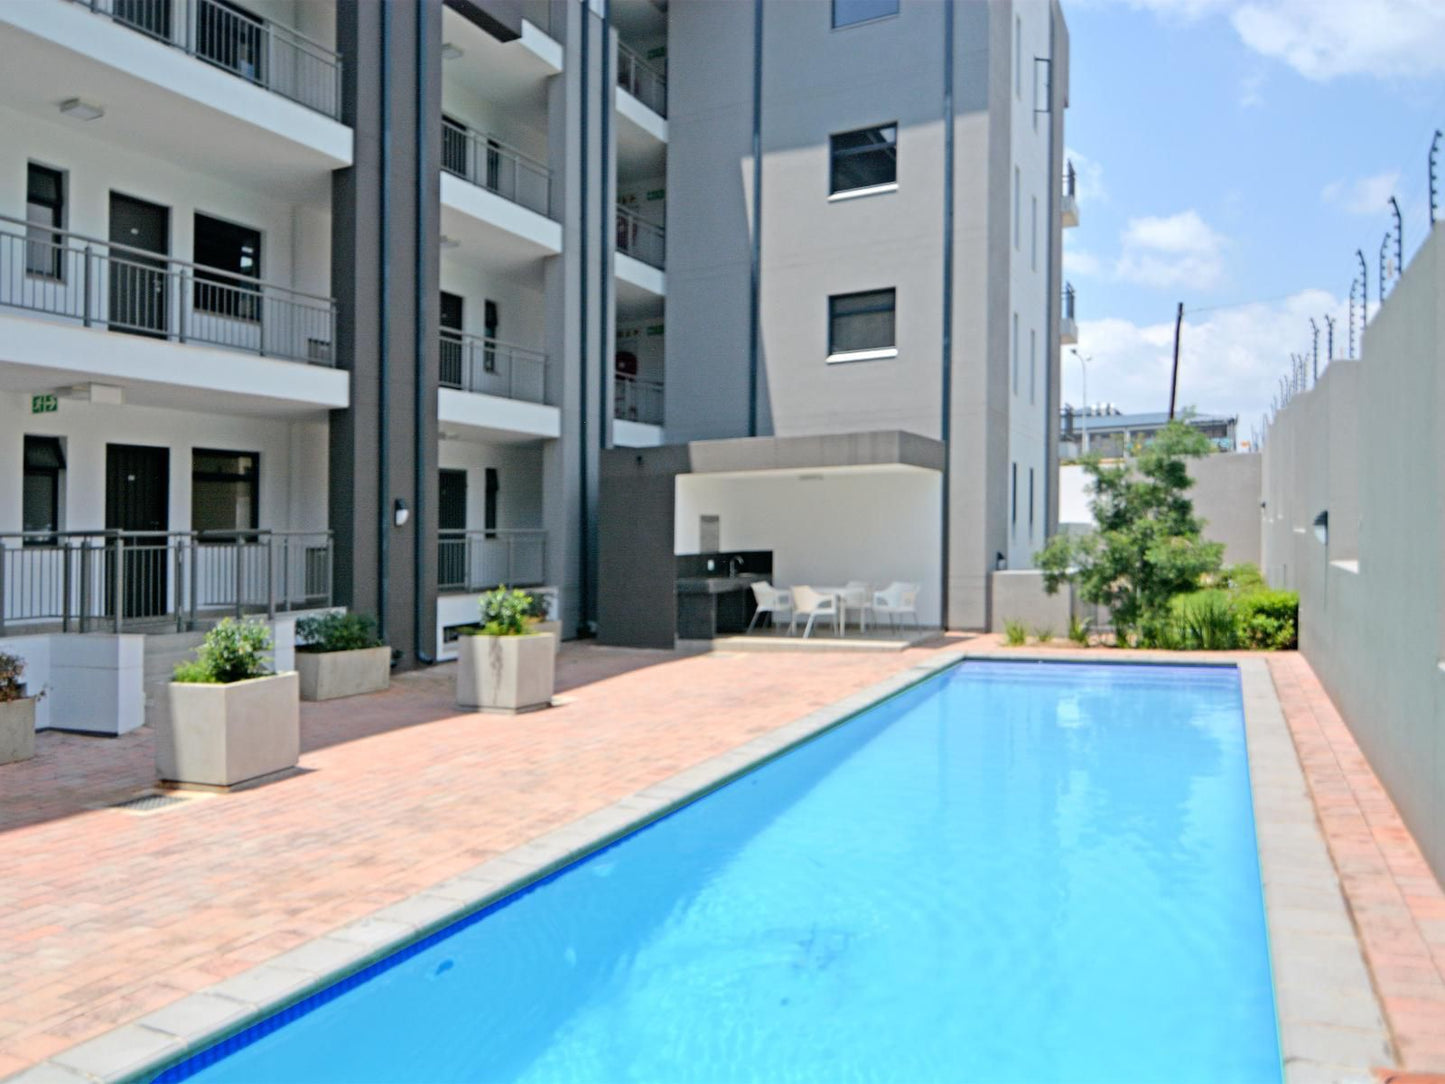 The Cube Zwelakho Luxury Apartments Rivonia Johannesburg Gauteng South Africa Balcony, Architecture, House, Building, Swimming Pool